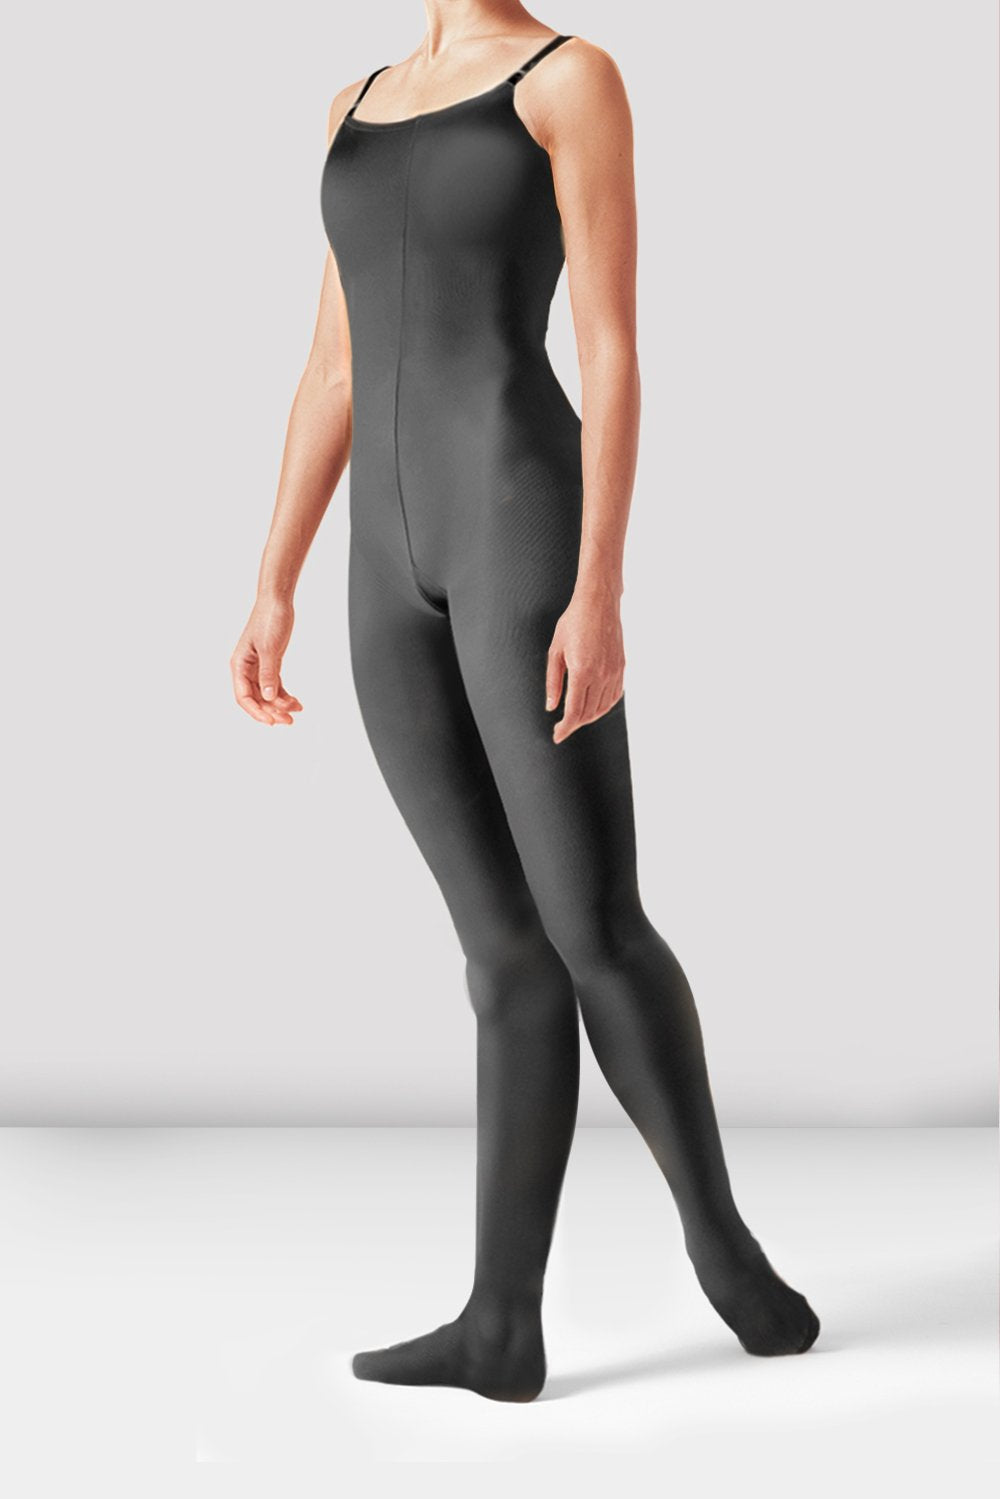 Capezio Footed/Footless Convertible Body Tights